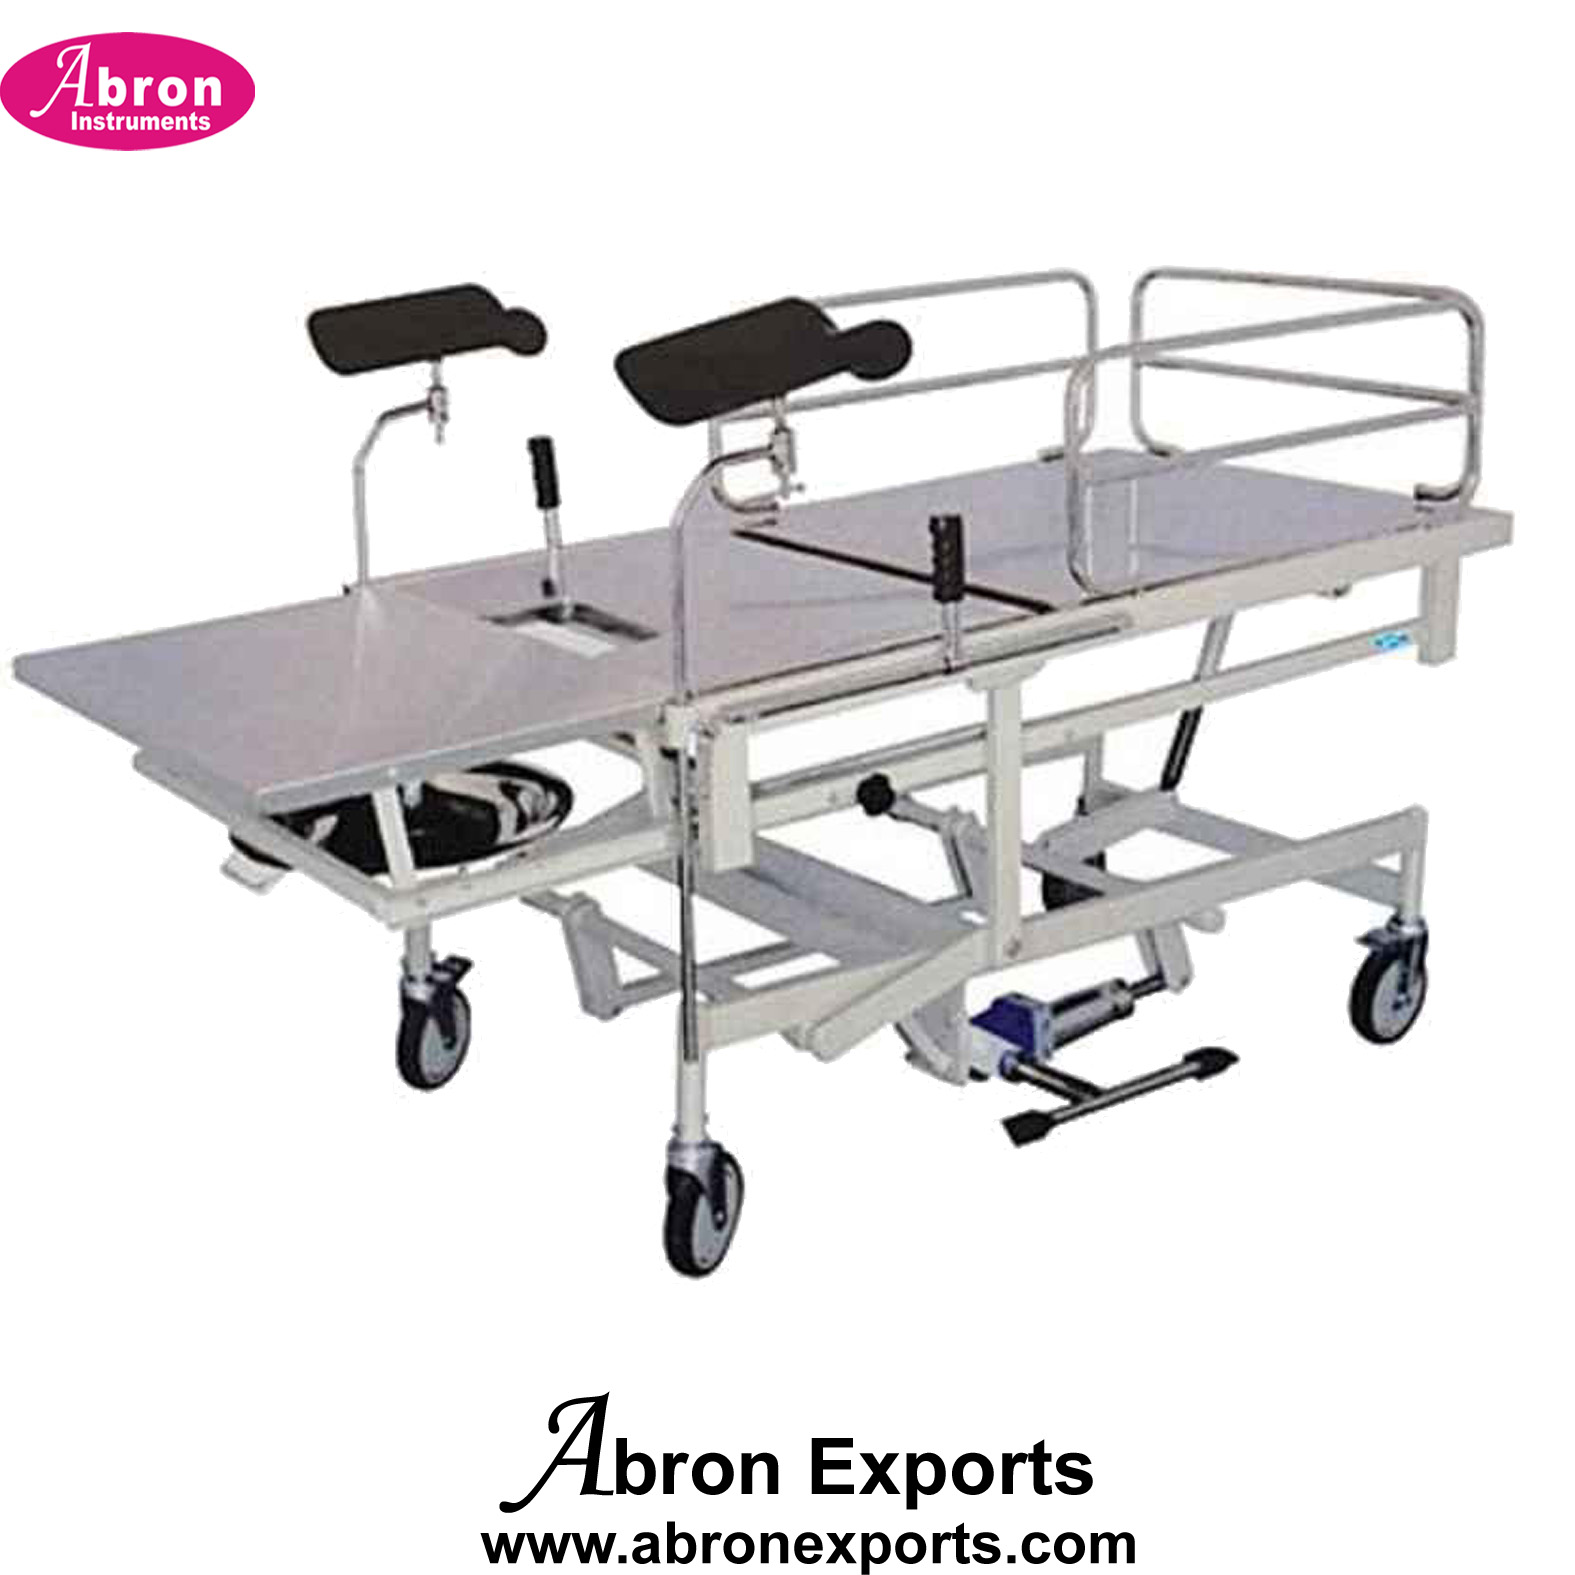 Gynecological Delivery Obsteric Labour Table Telescopic Adjustment Examination Table 180x6076 cm Labour And Delivery With Legs Wheels Support Abron ABM-2714GTA 